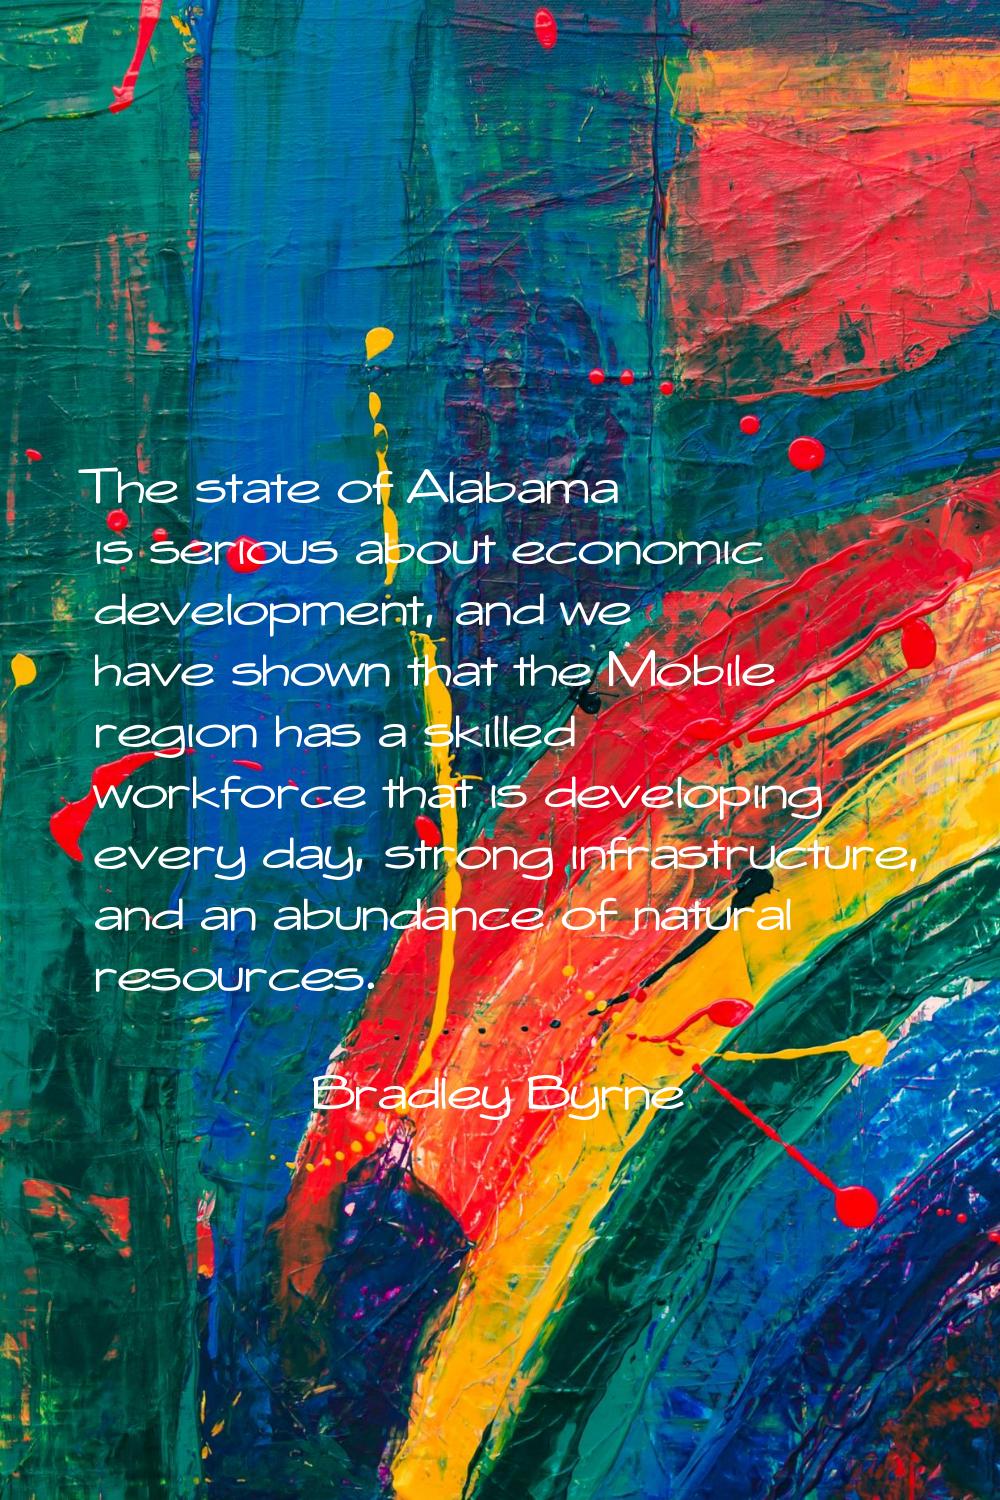 The state of Alabama is serious about economic development, and we have shown that the Mobile regio